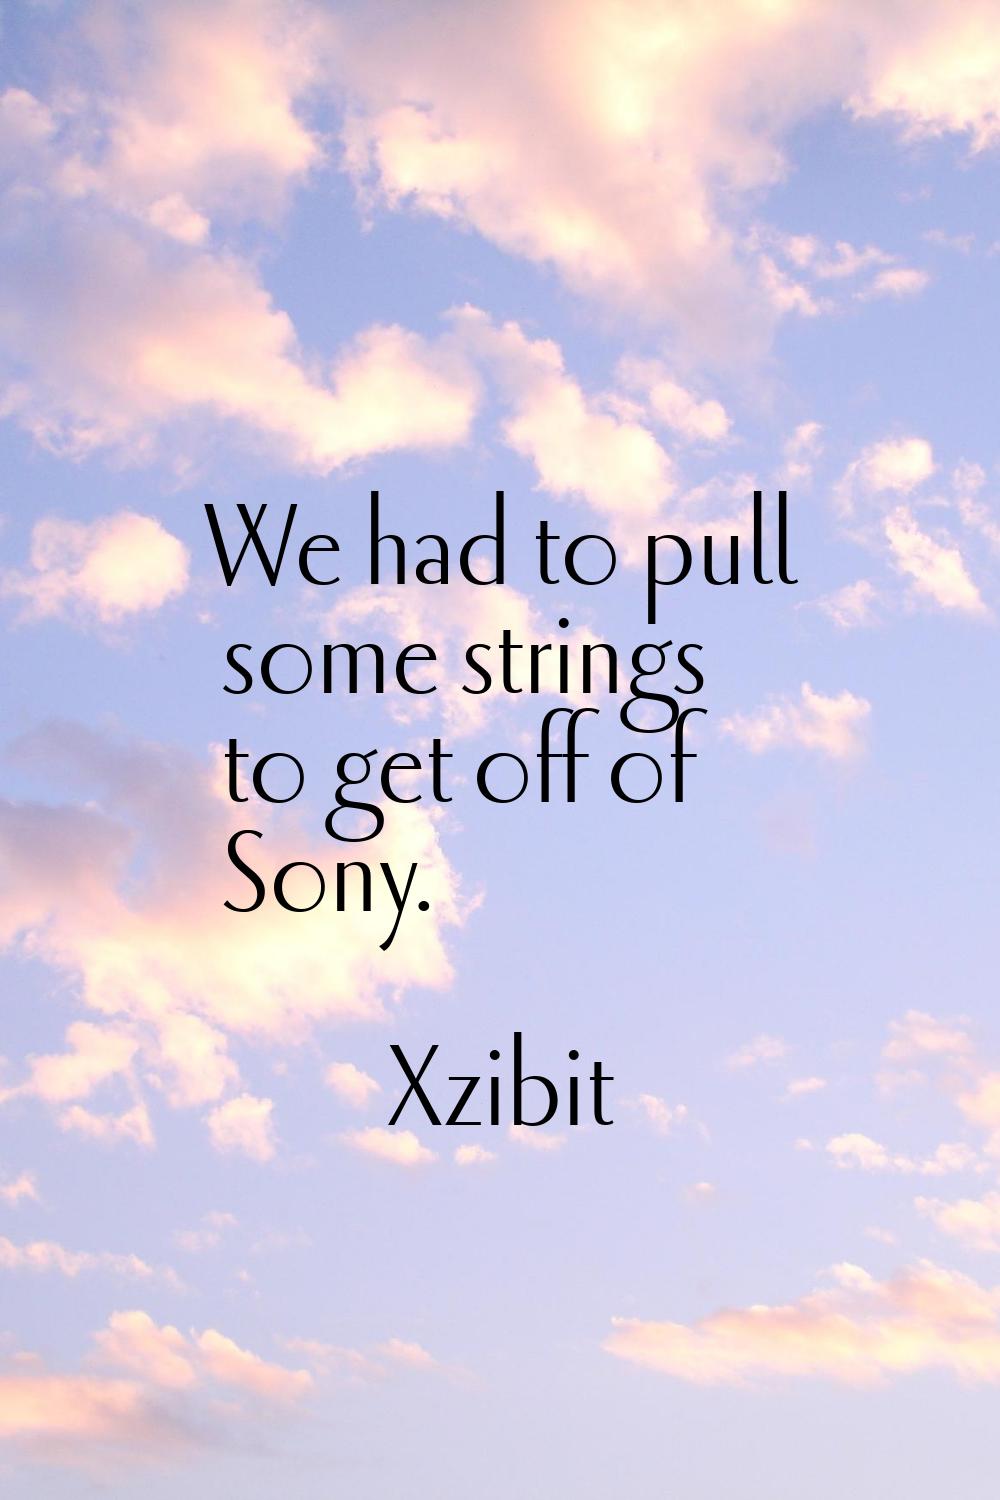 We had to pull some strings to get off of Sony.